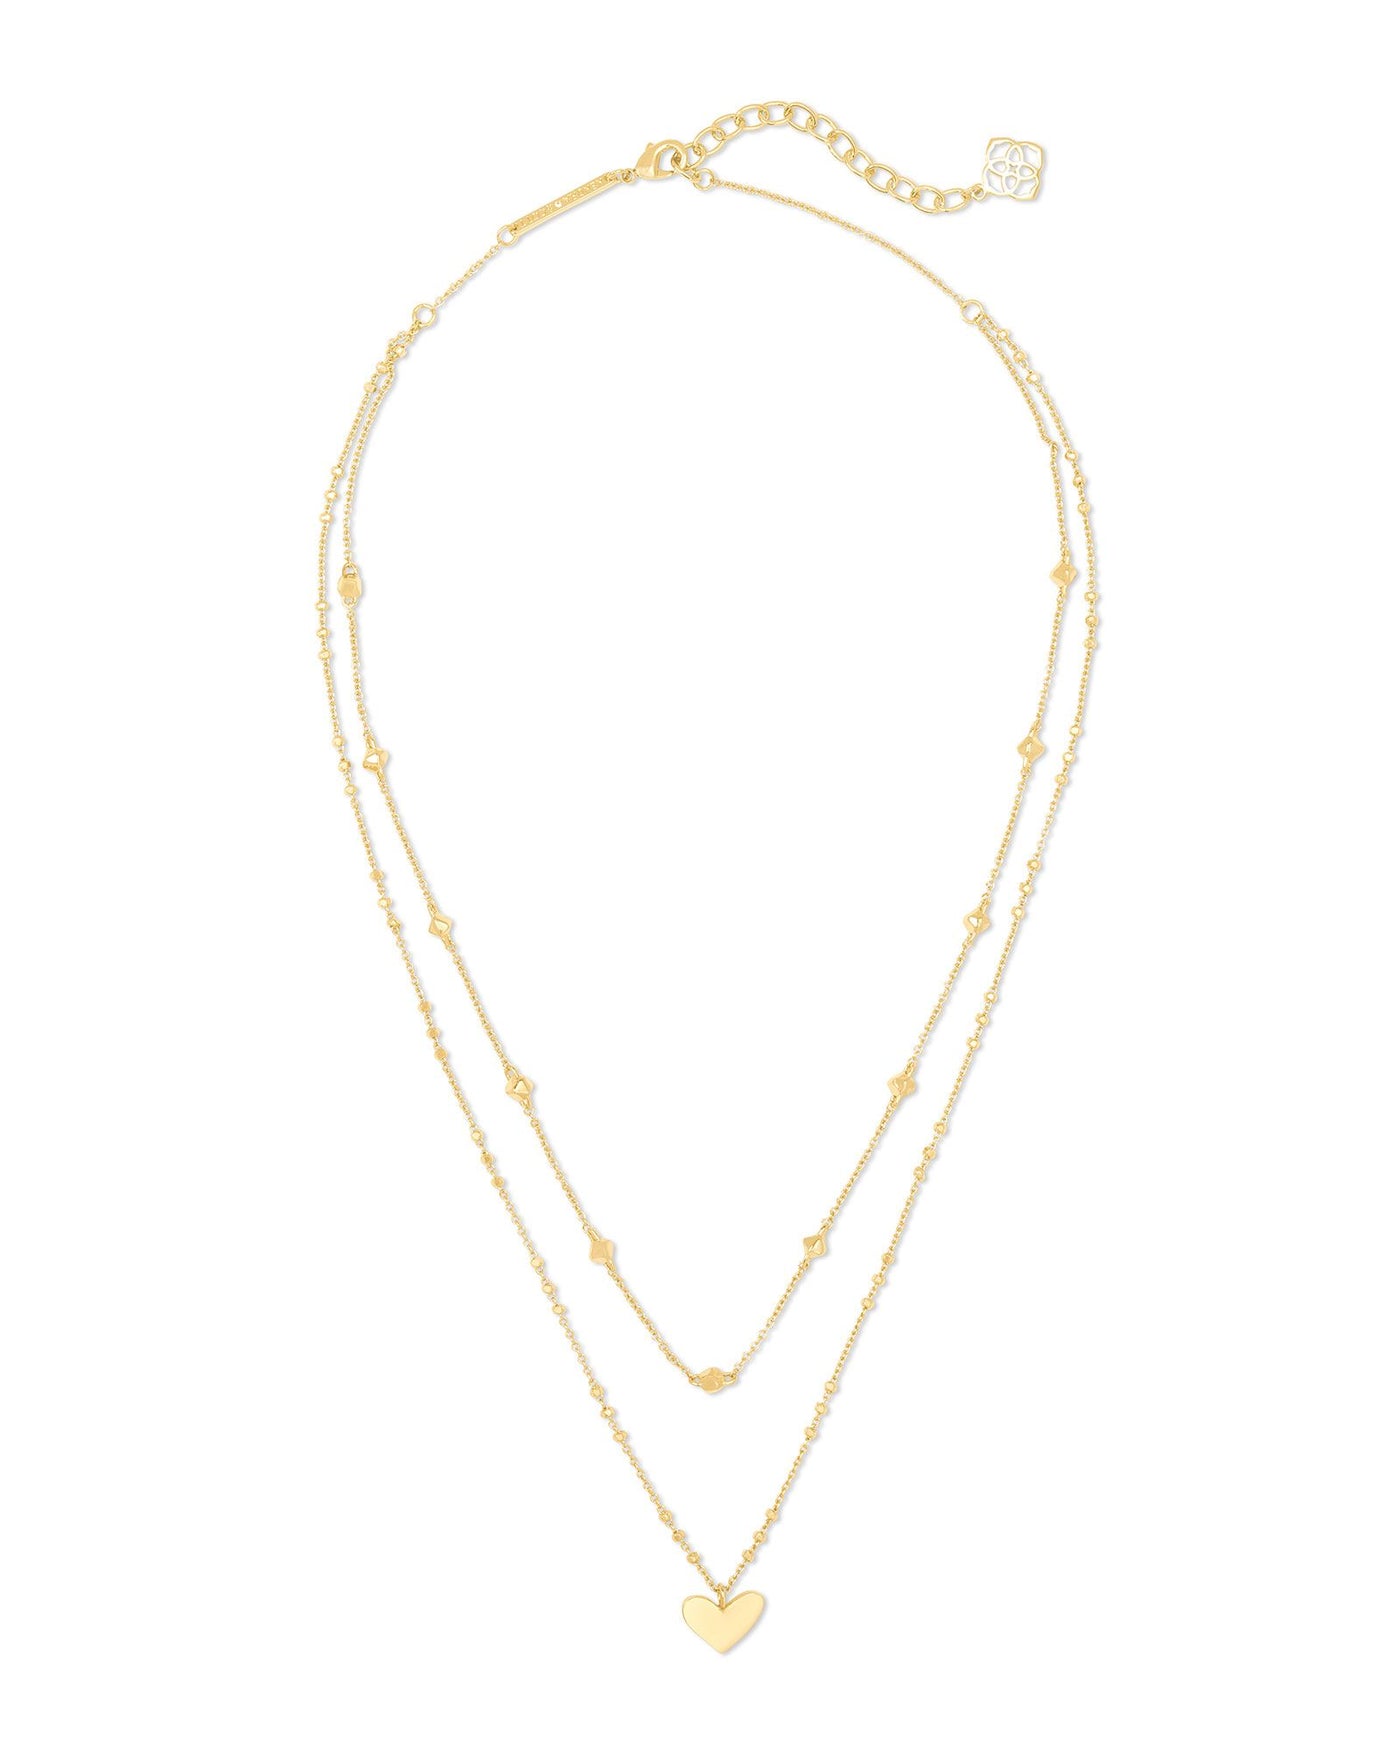 Kendra Scott Ari Heart Multi Strand Necklace-Necklaces-Kendra Scott-Market Street Nest, Fashionable Clothing, Shoes and Home Décor Located in Mabank, TX